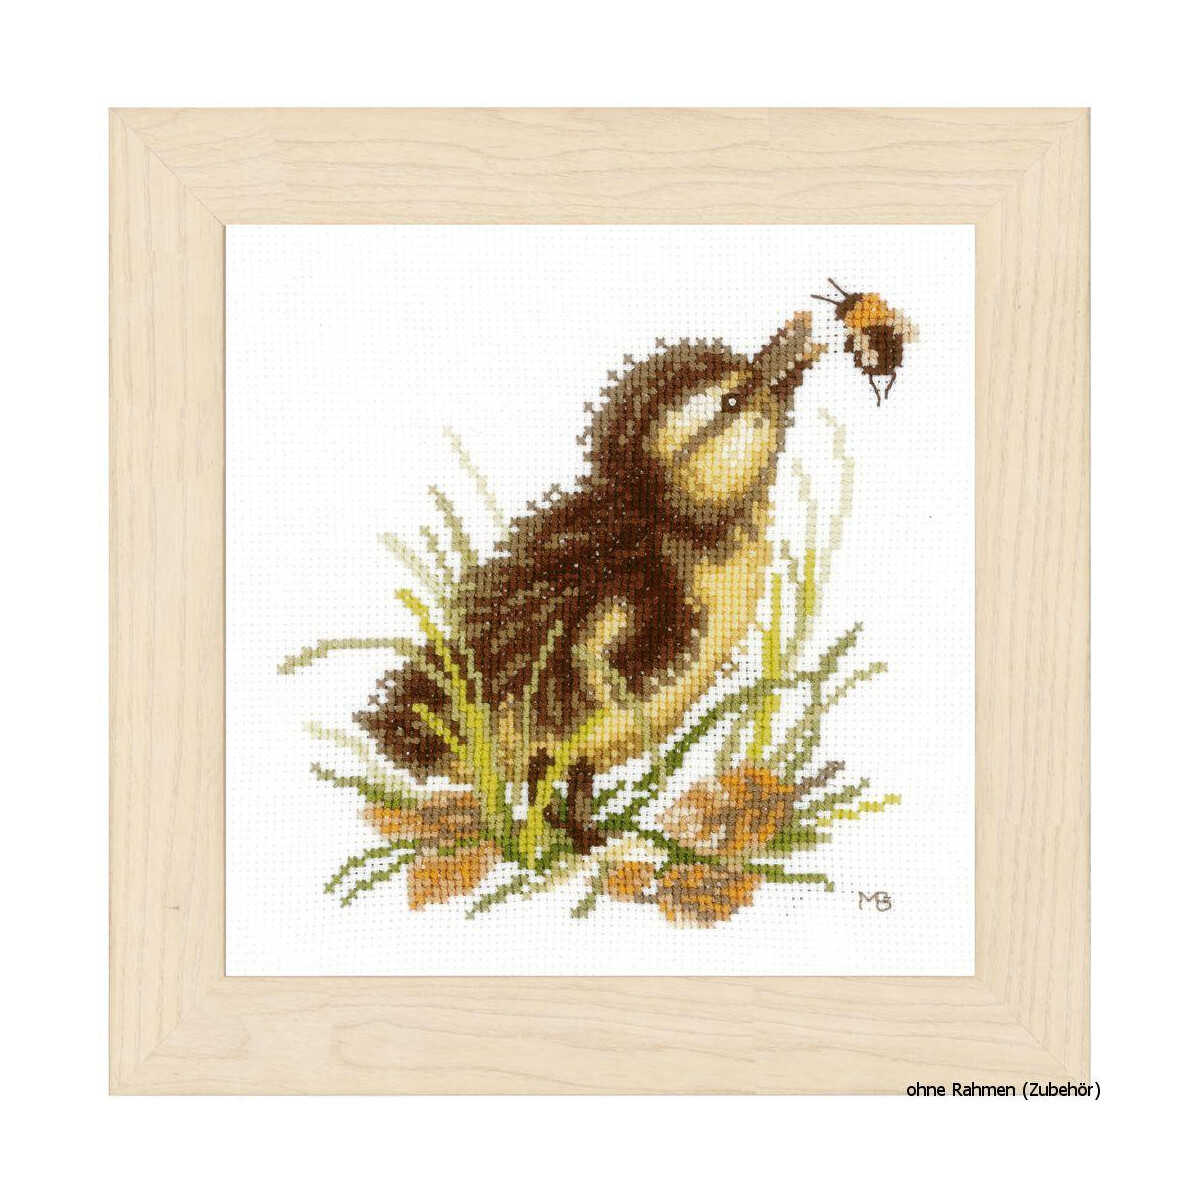 A framed cross stitch artwork or embroidery pack from...